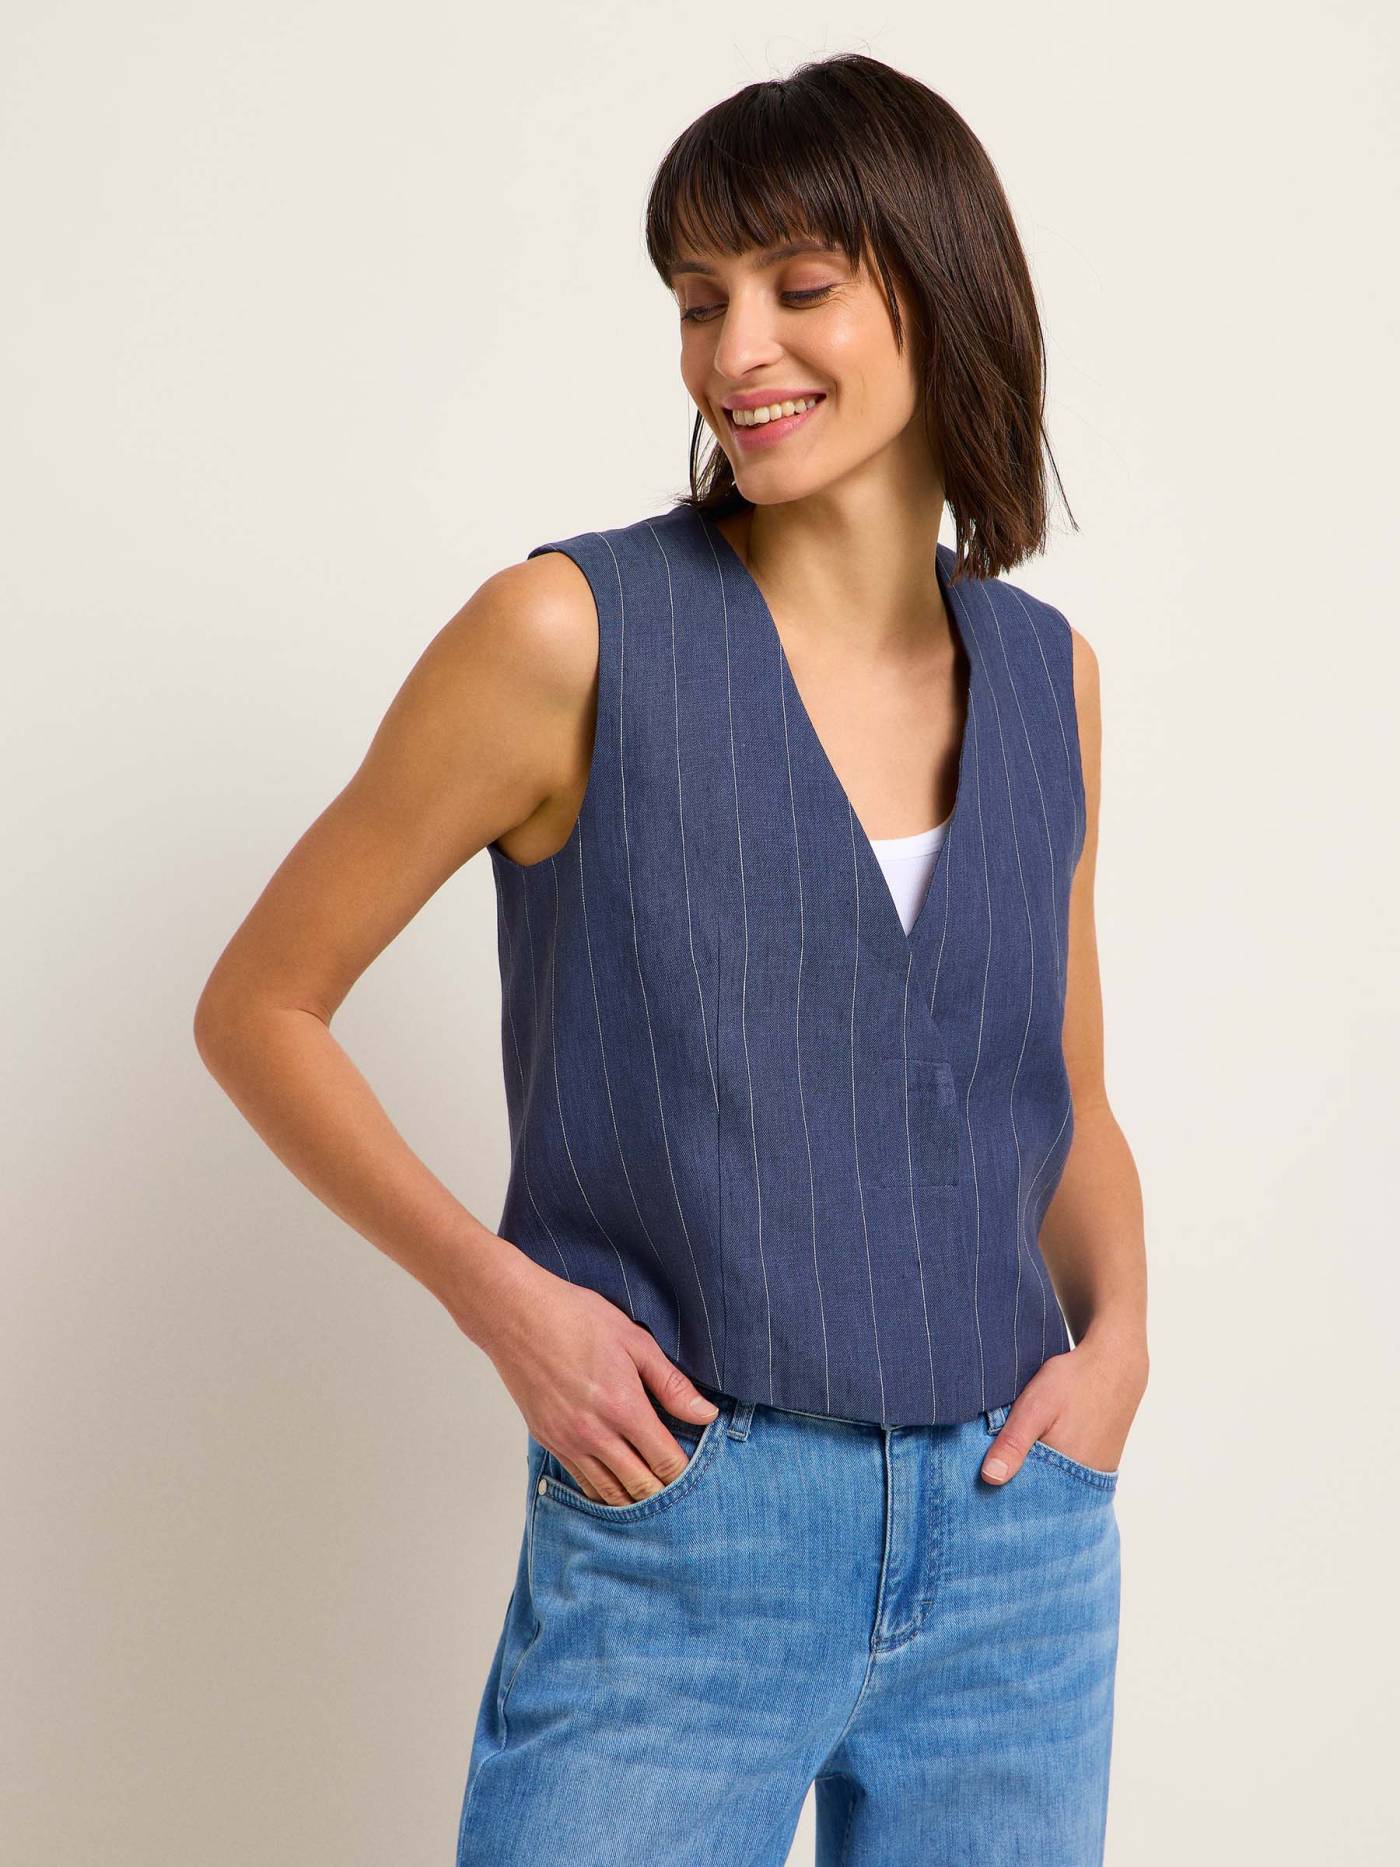 Striped vest from LANIUS